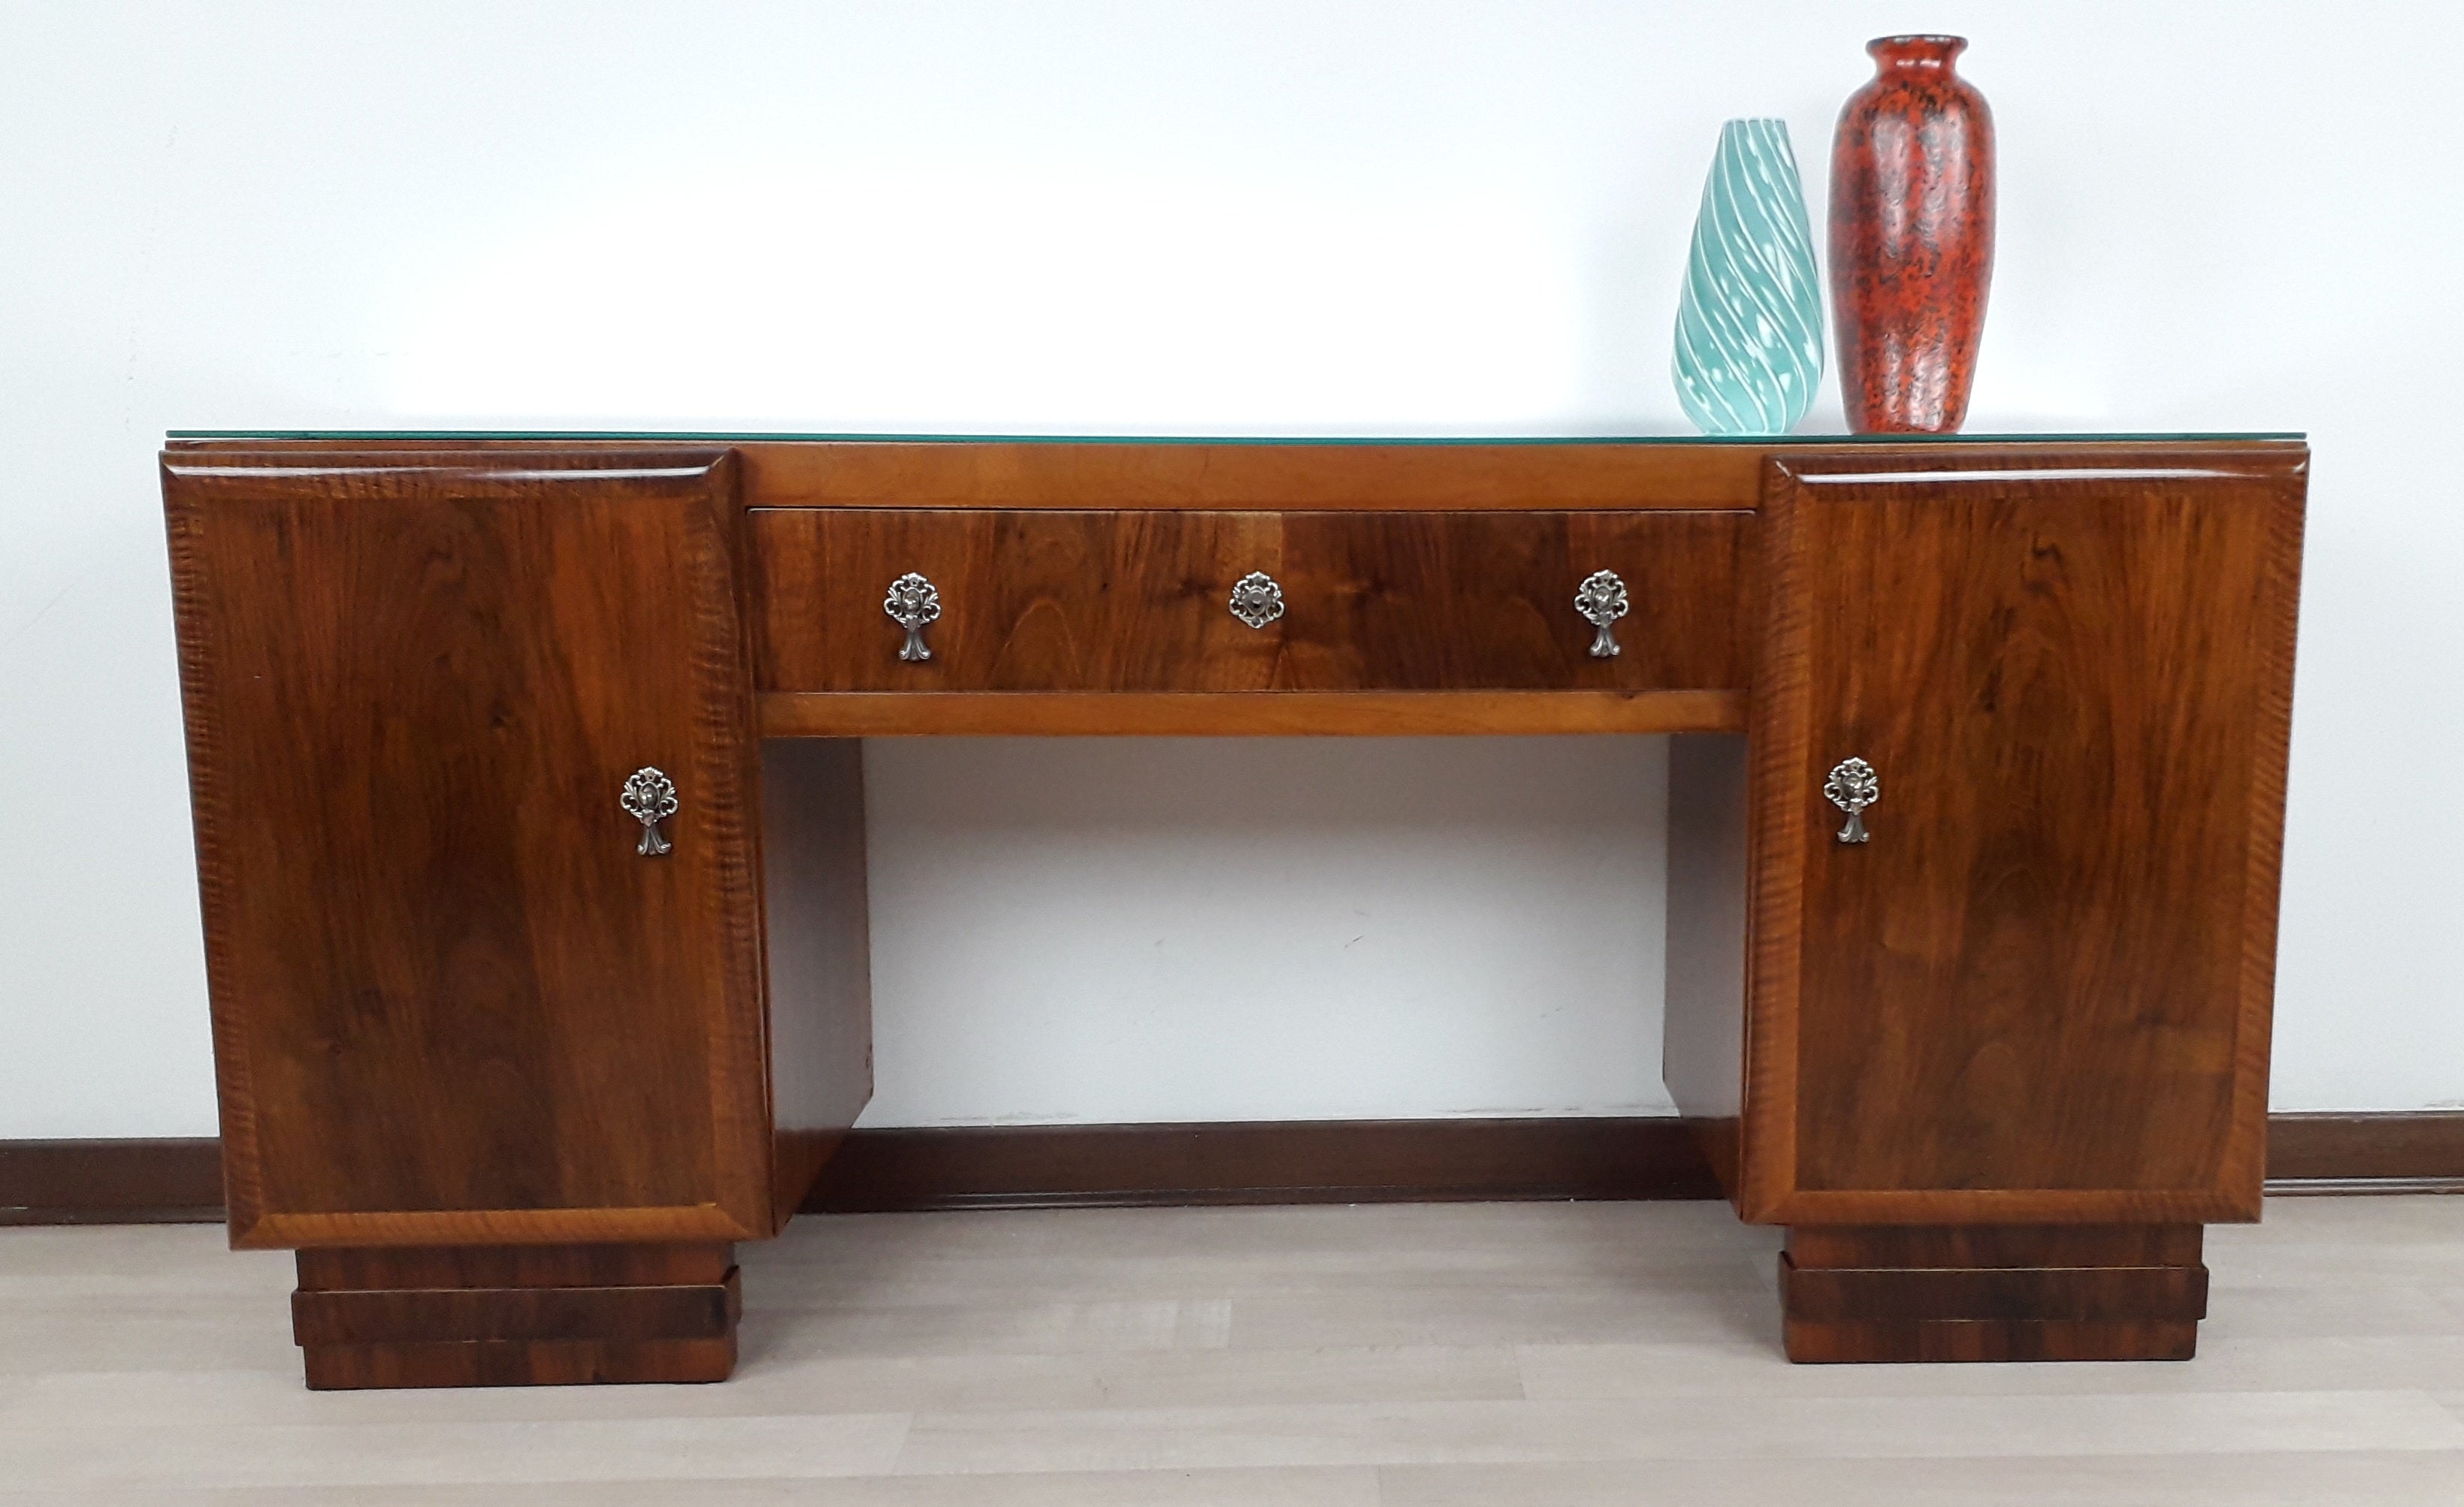 Elegant Blonde Walnut Feather Vanity of the Venetian School.
Peculiar brass handles handcrafted on commission from machined brass.
3-step Walnut Root Feet
The cabinet presents a simple line and perfect proportions to place it in any